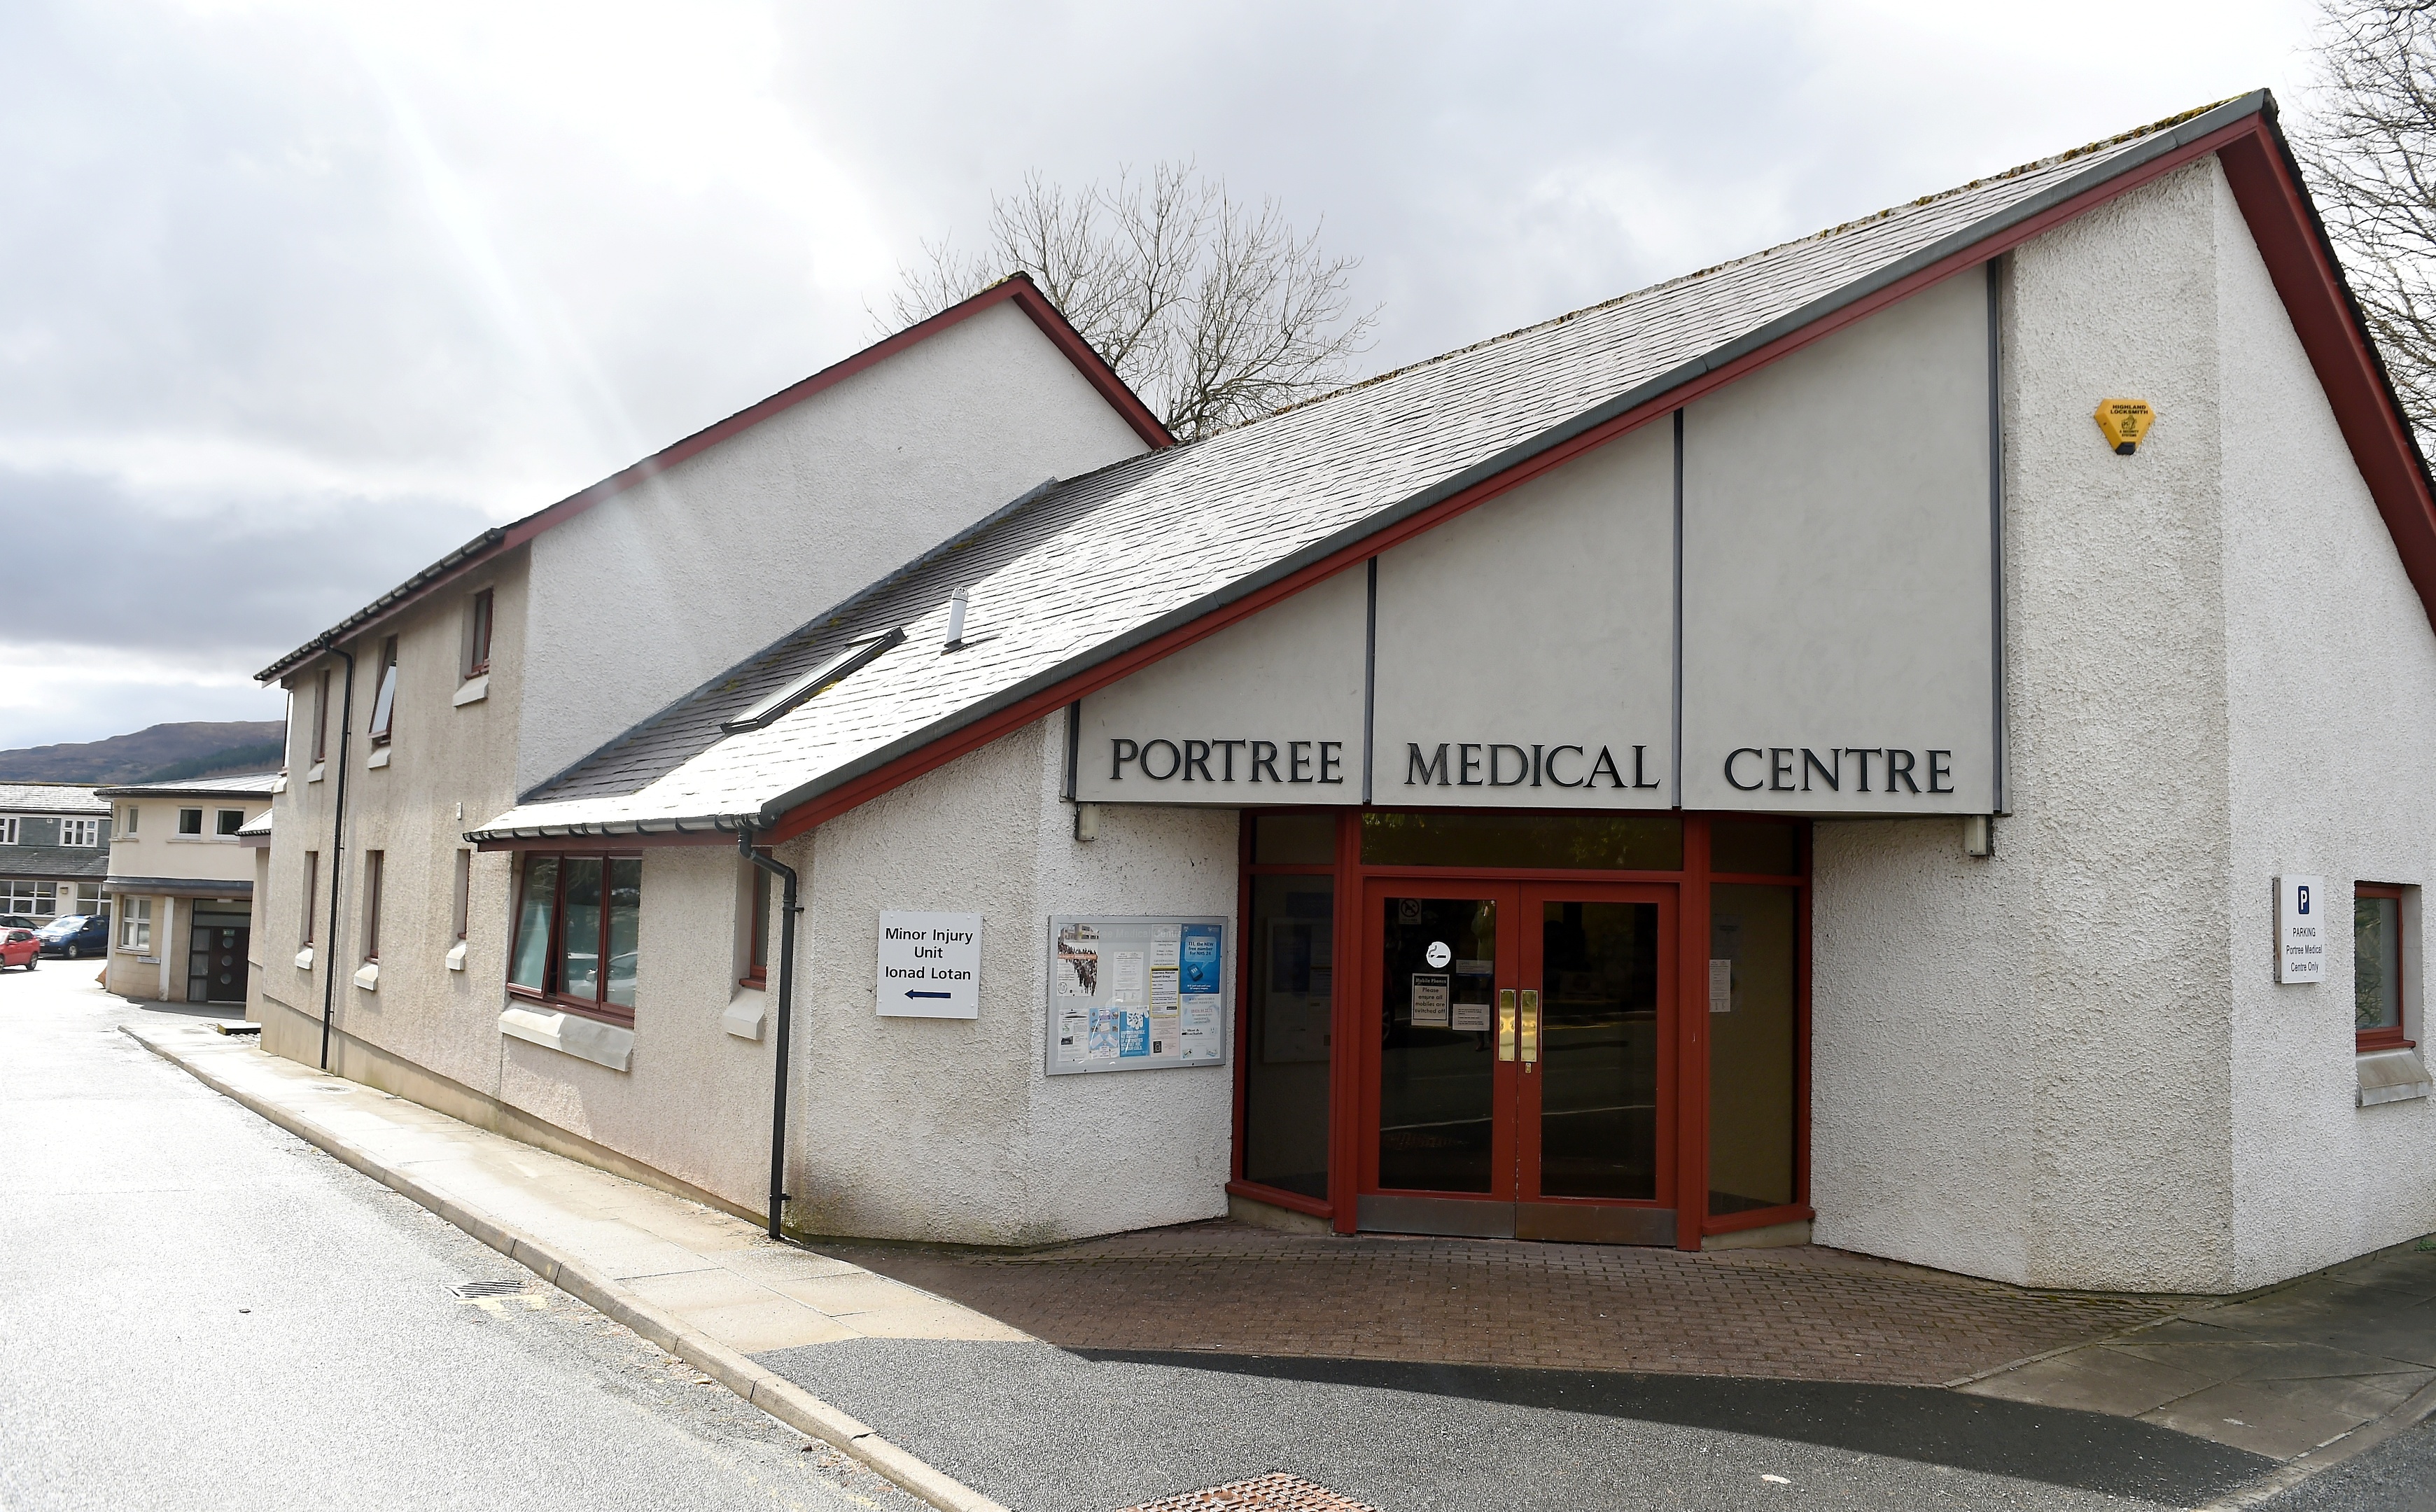 The Portree Medical Centre